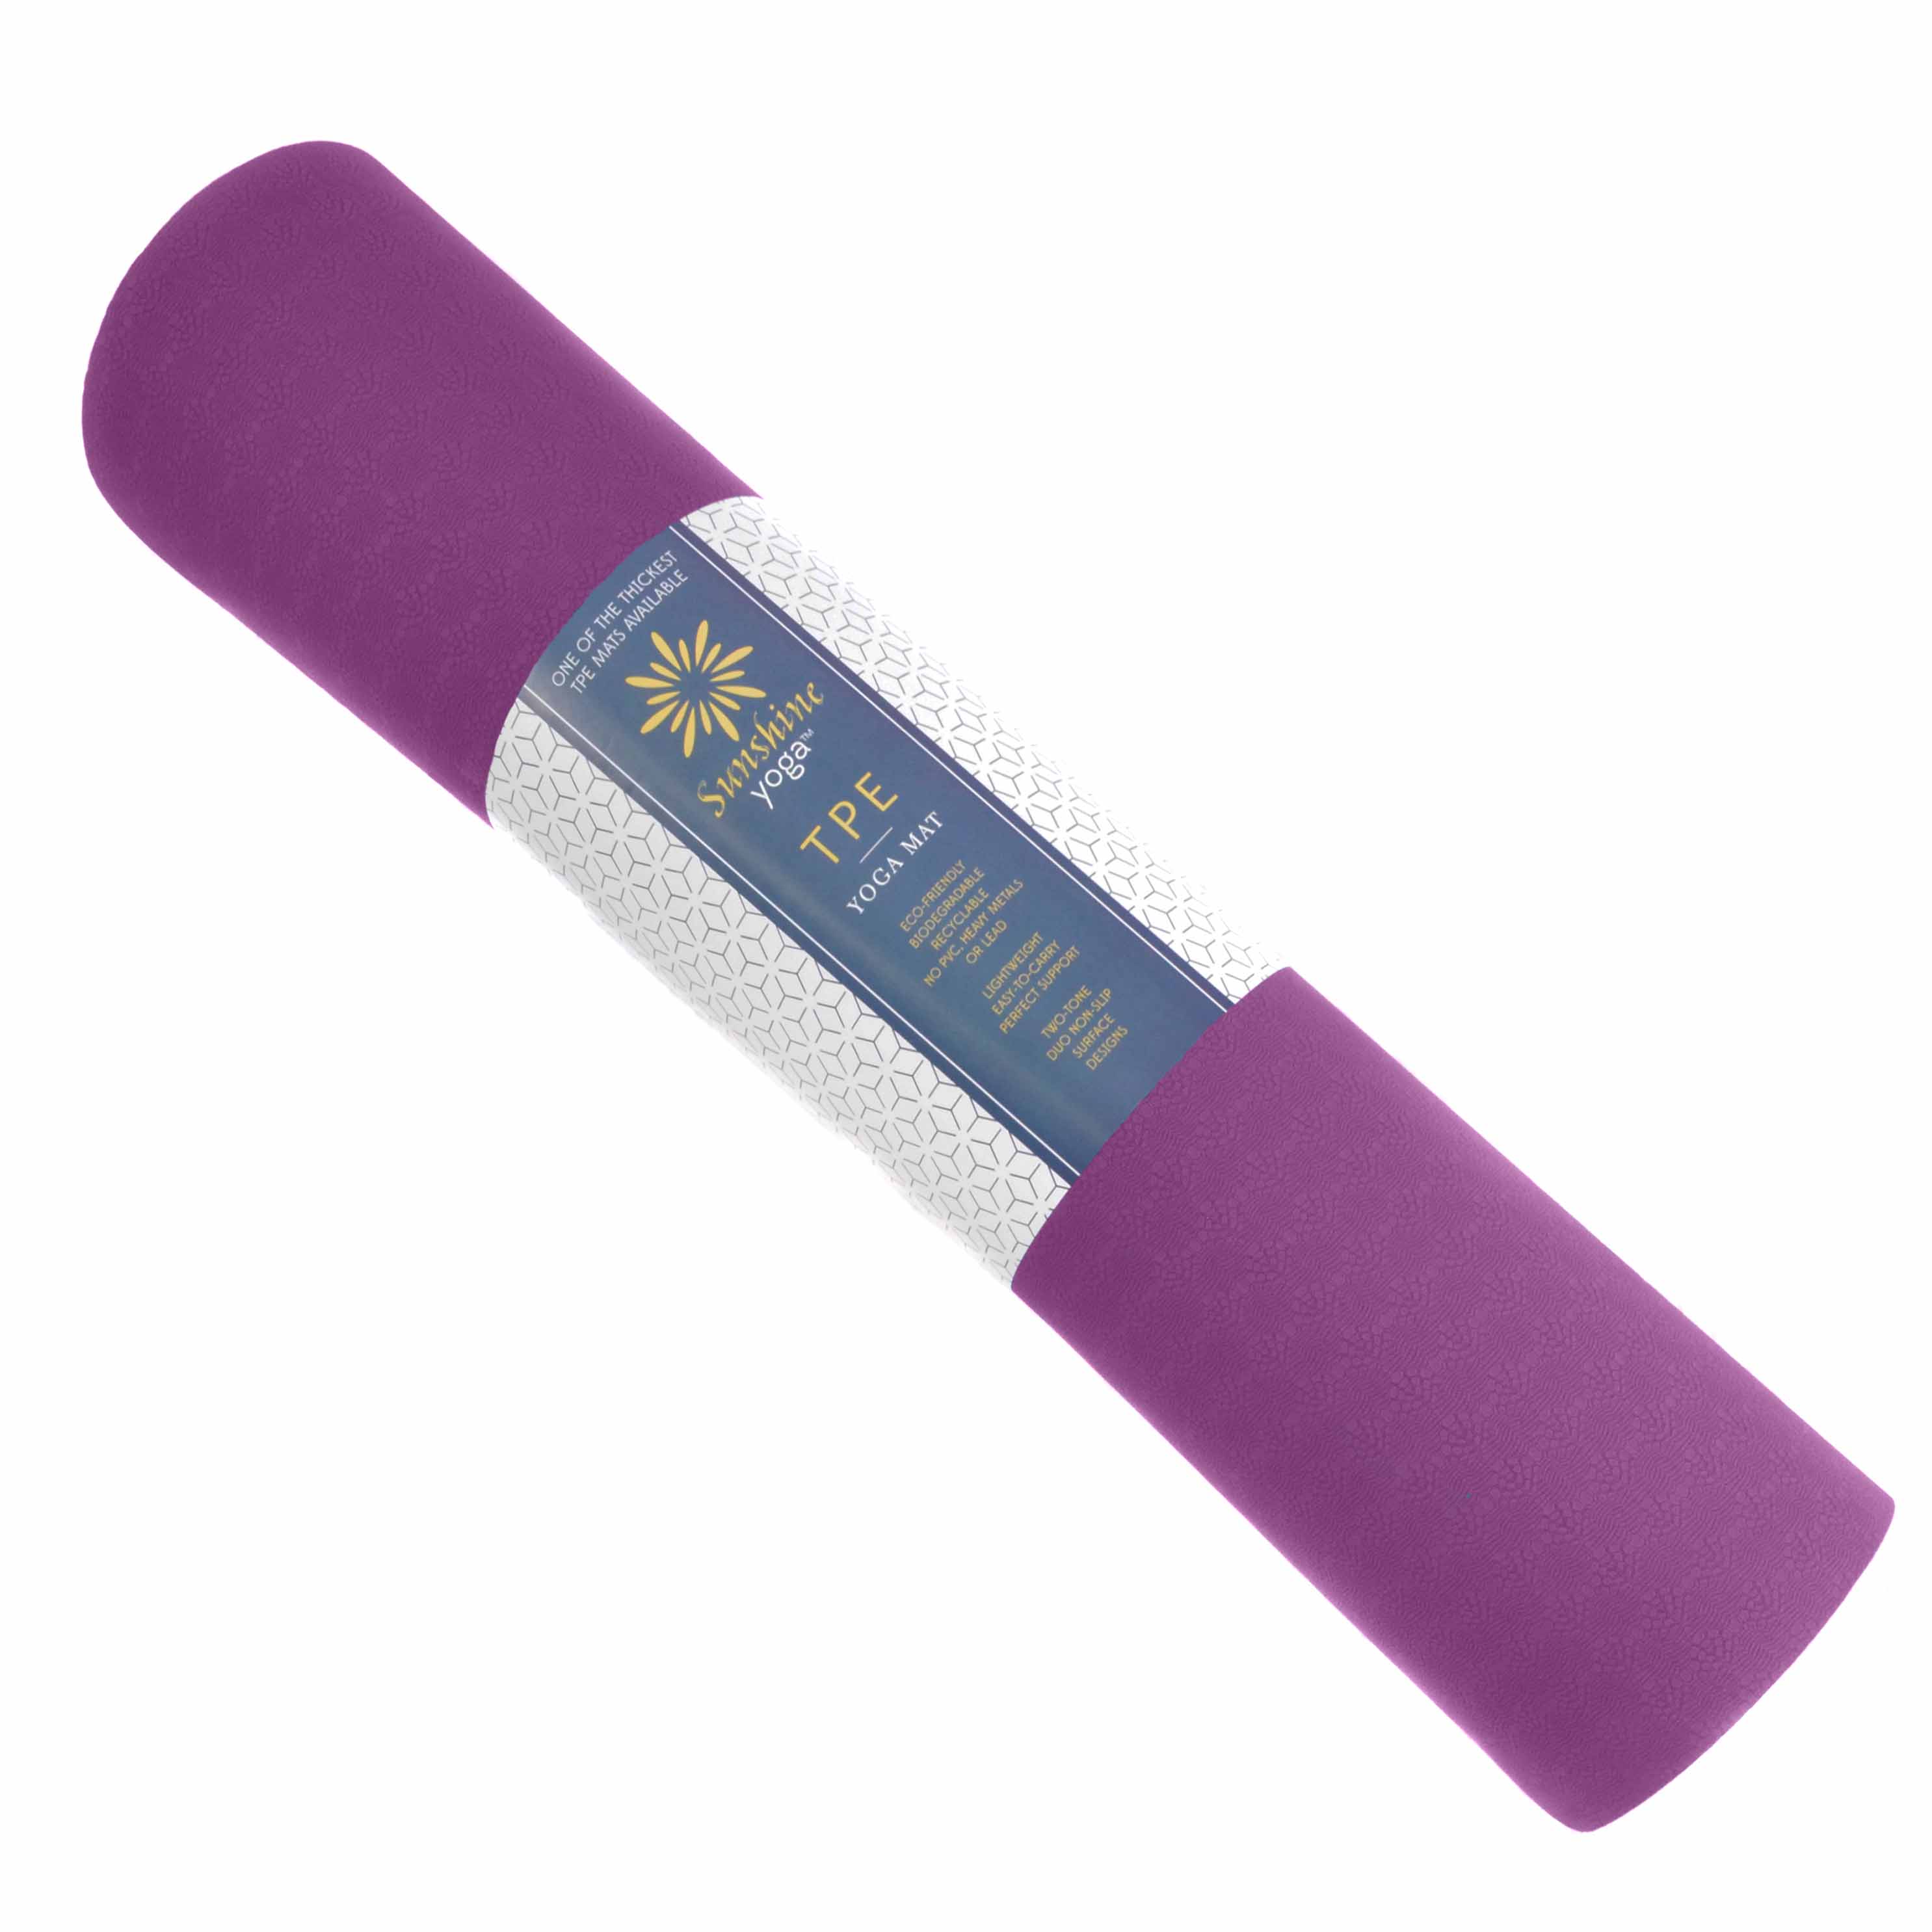 How to Choose the Best Yoga Mat - Part 1 - Yoga Mat Size, Grip and